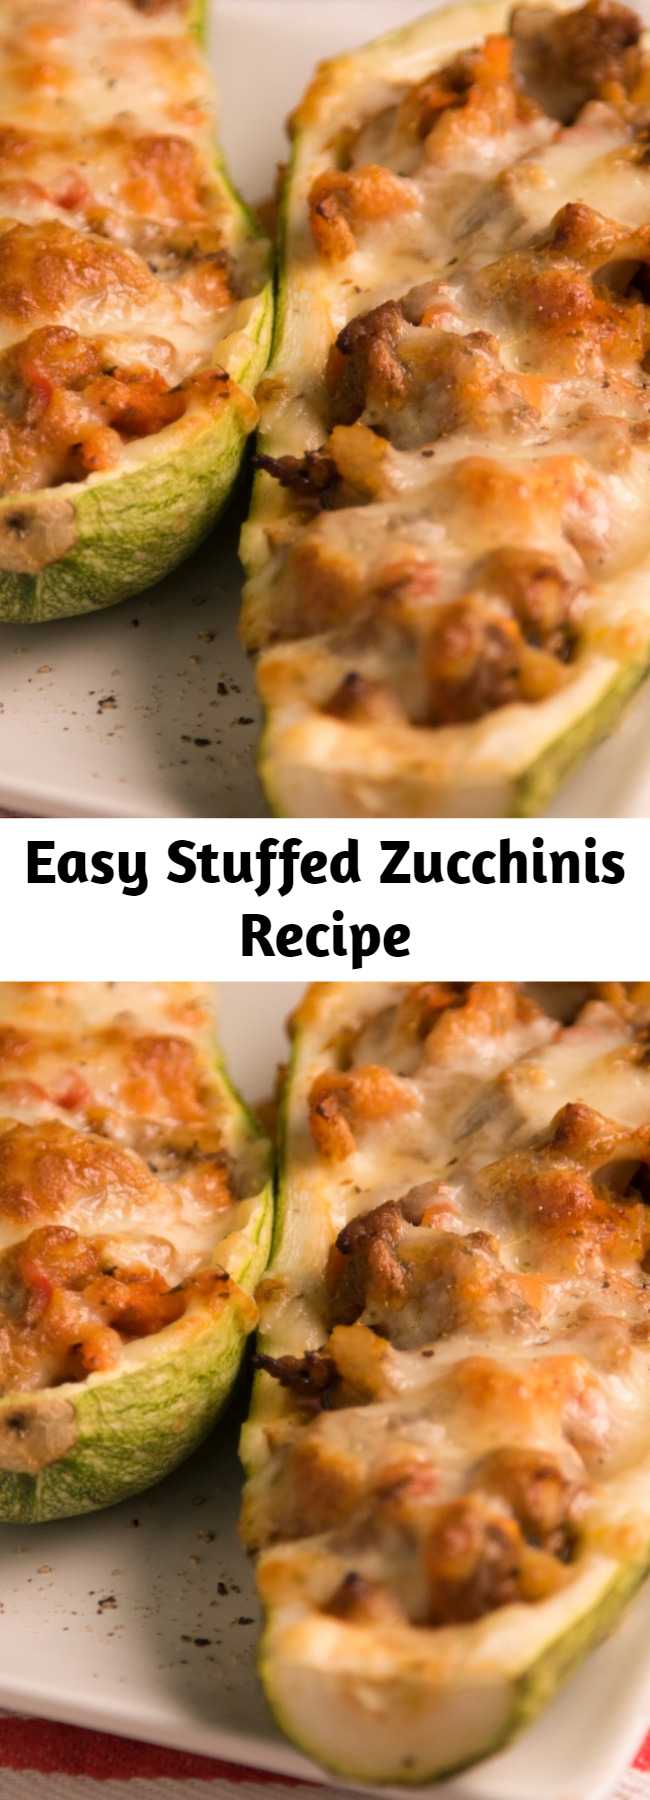 Easy Stuffed Zucchinis Recipe - This is exactly how you're going to feel after you eat this delicious meal. No regrets, though.